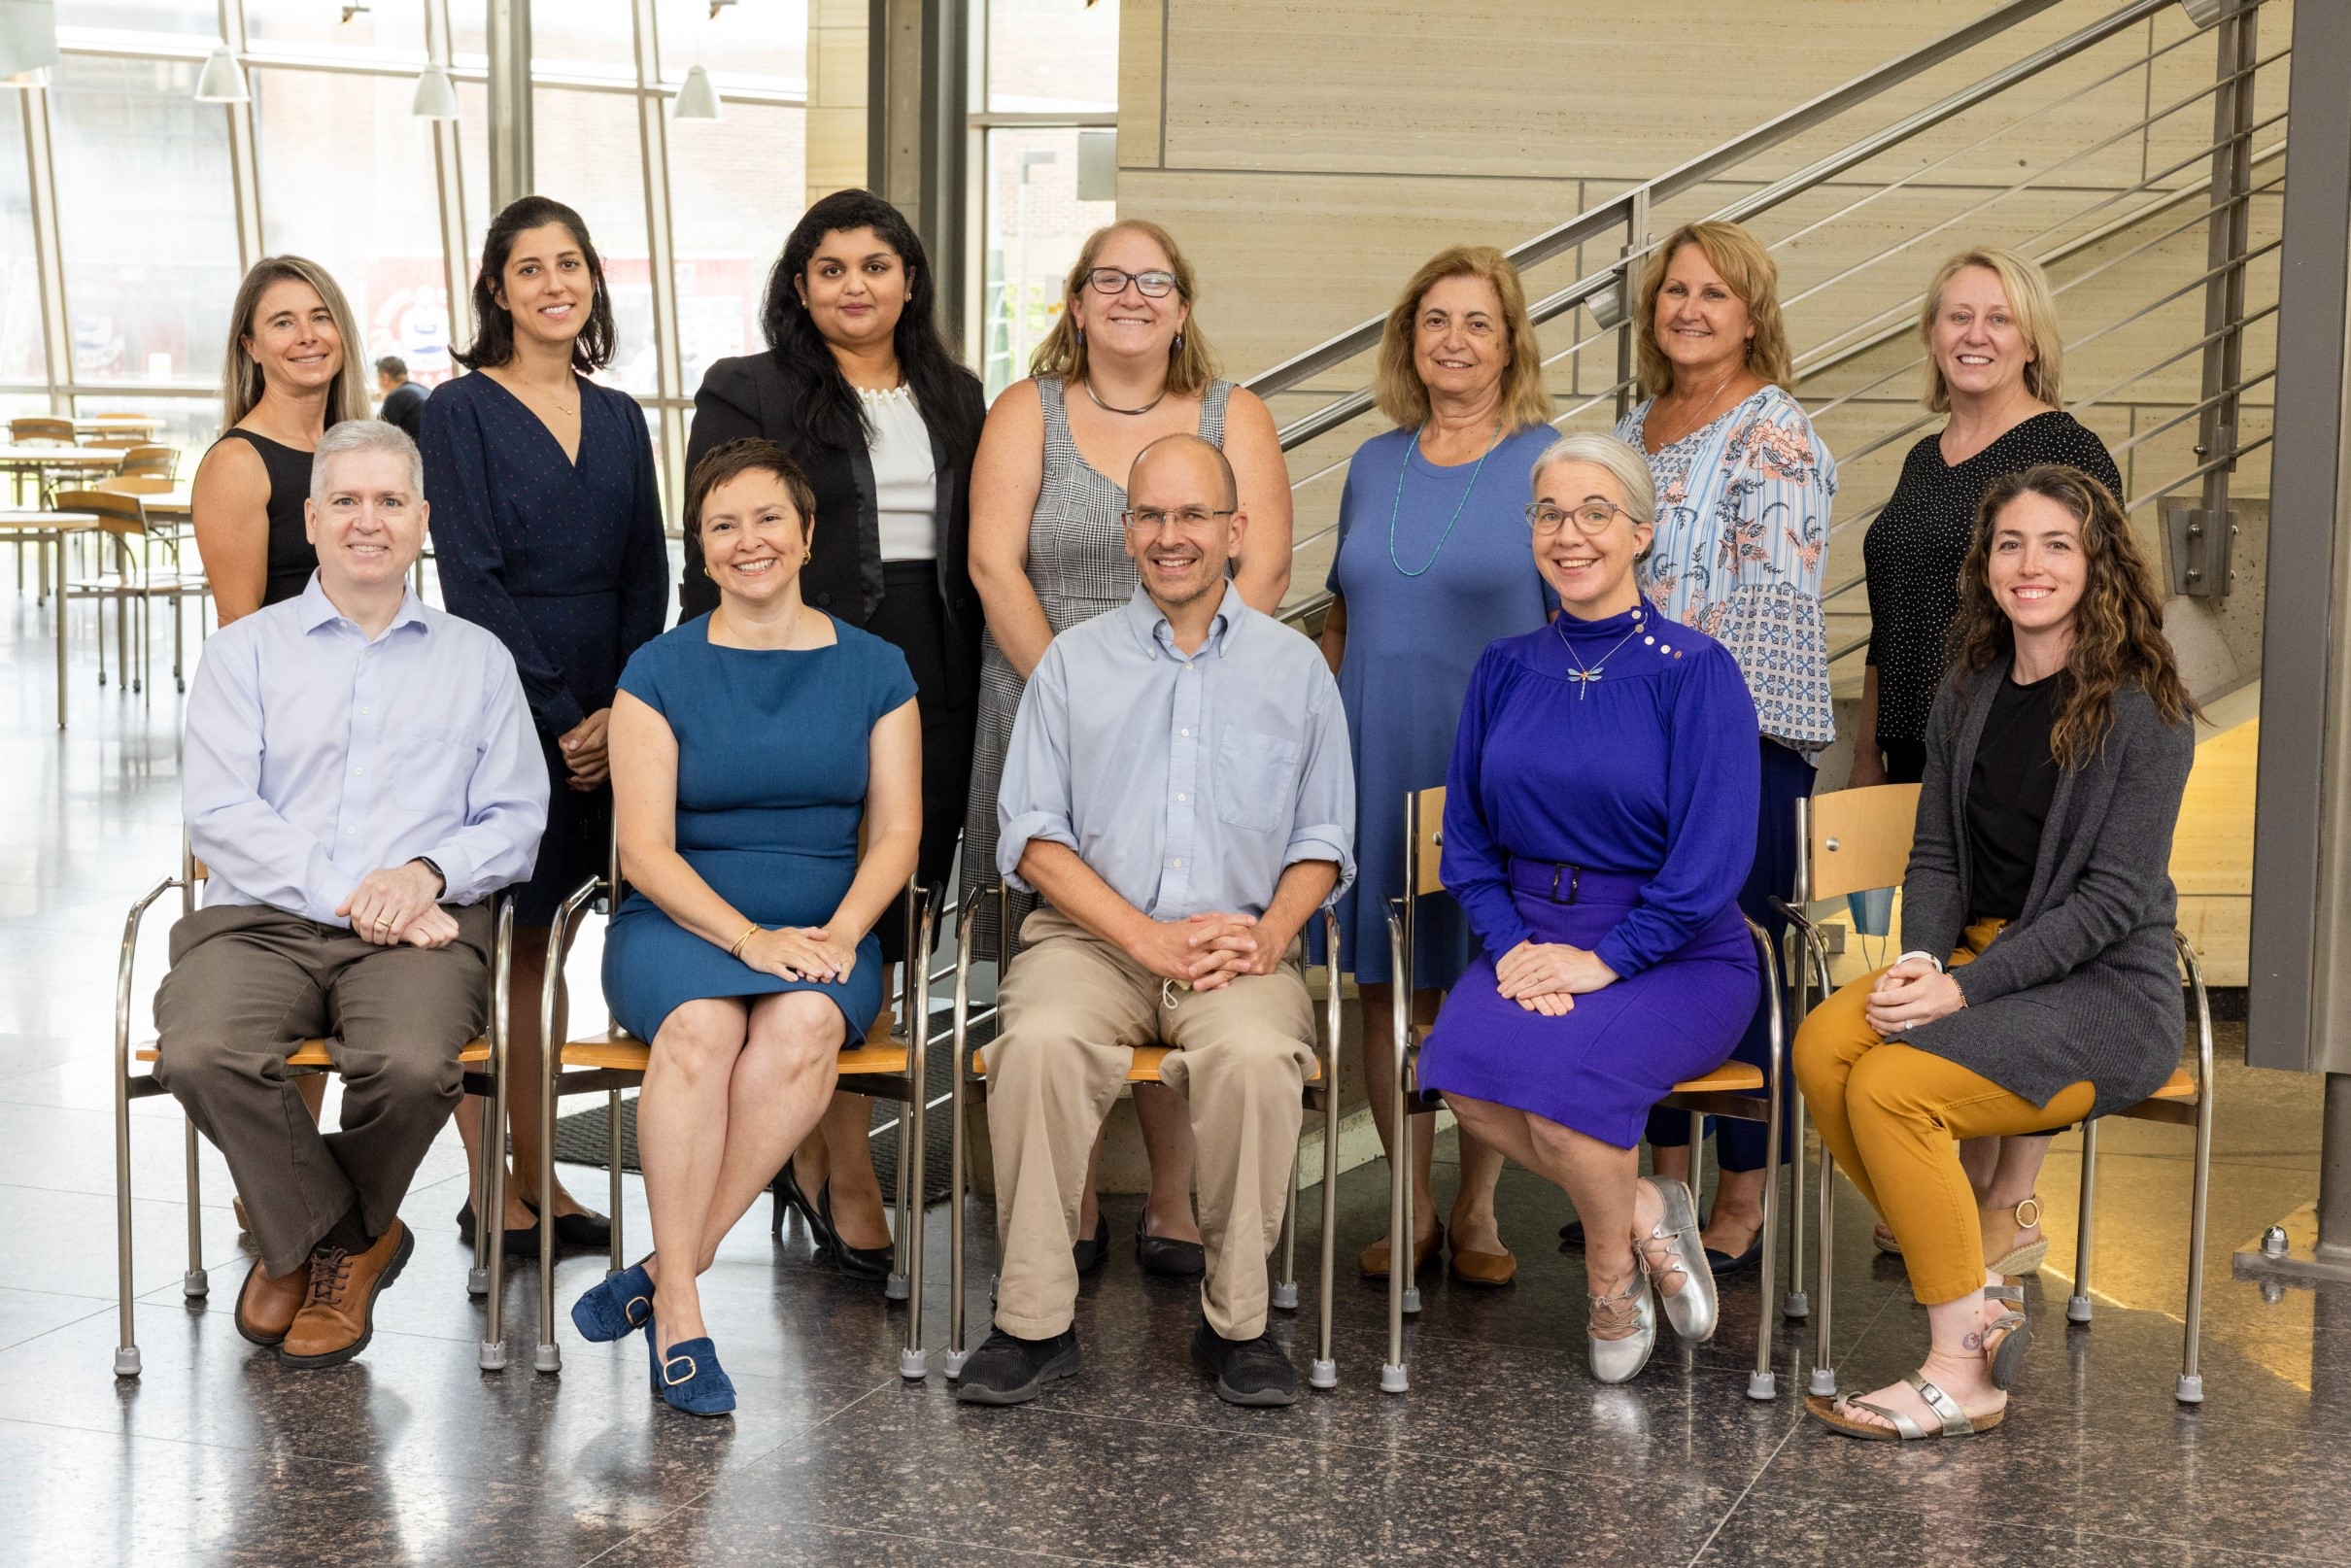 UI Stead Family Department of Pediatrics' Endocrinology and Diabetes faculty photo, 2022